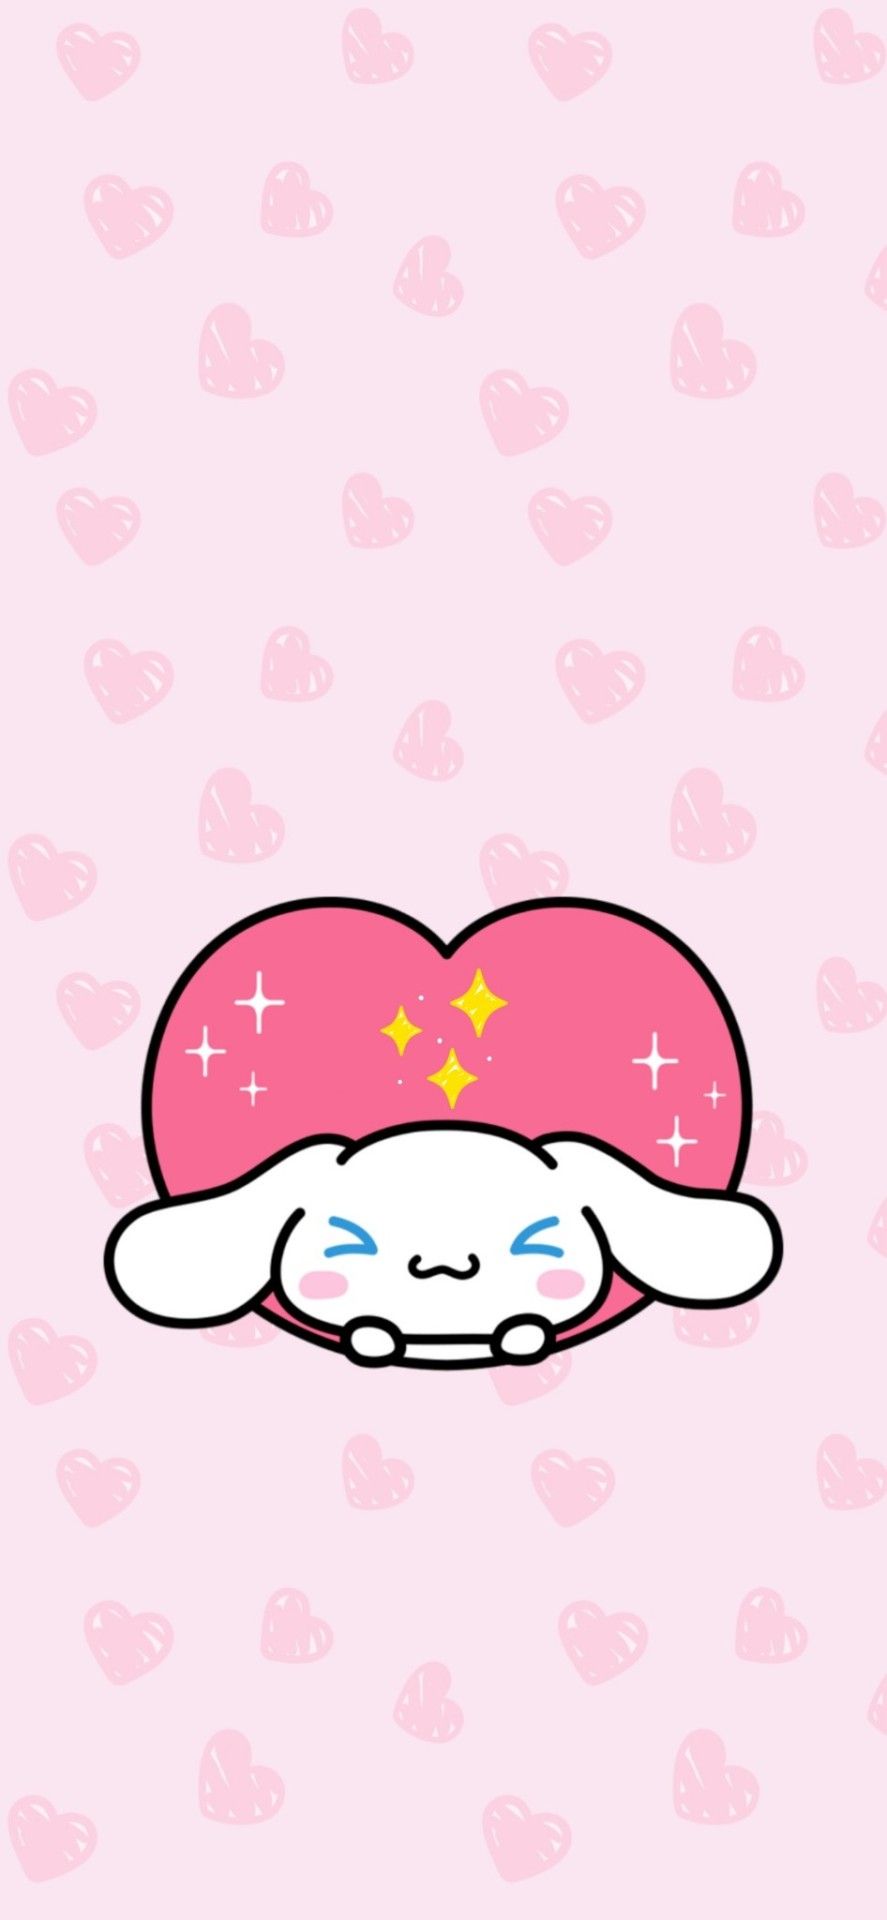 Sanrio Characters iPhone Wallpaper with high-resolution 1080x1920 pixel. You can use this wallpaper for your iPhone 5, 6, 7, 8, X, XS, XR backgrounds, Mobile Screensaver, or iPad Lock Screen - Cinnamoroll